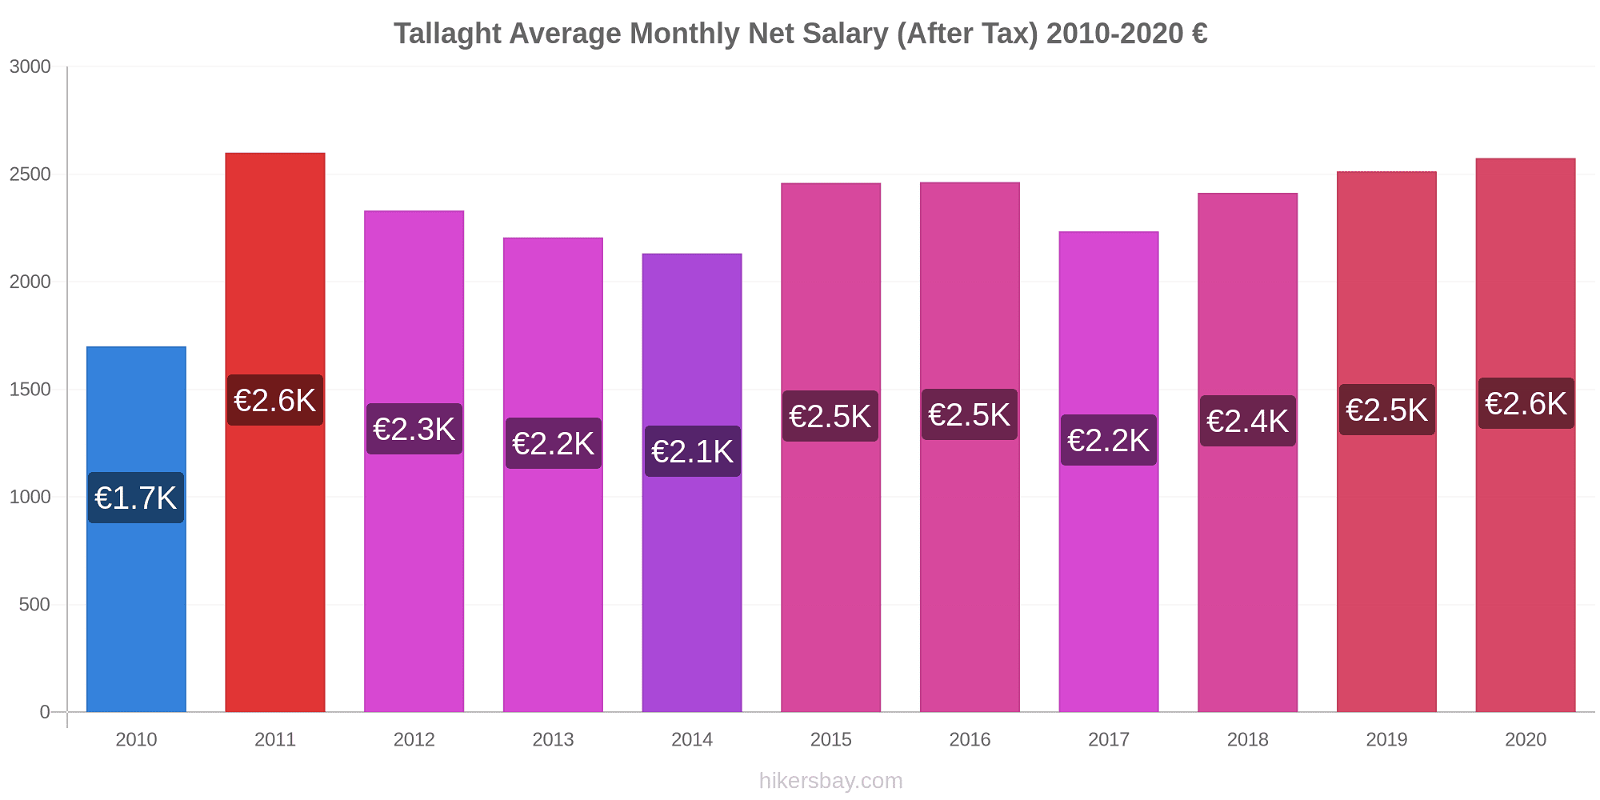 Tallaght price changes Average Monthly Net Salary (After Tax) hikersbay.com